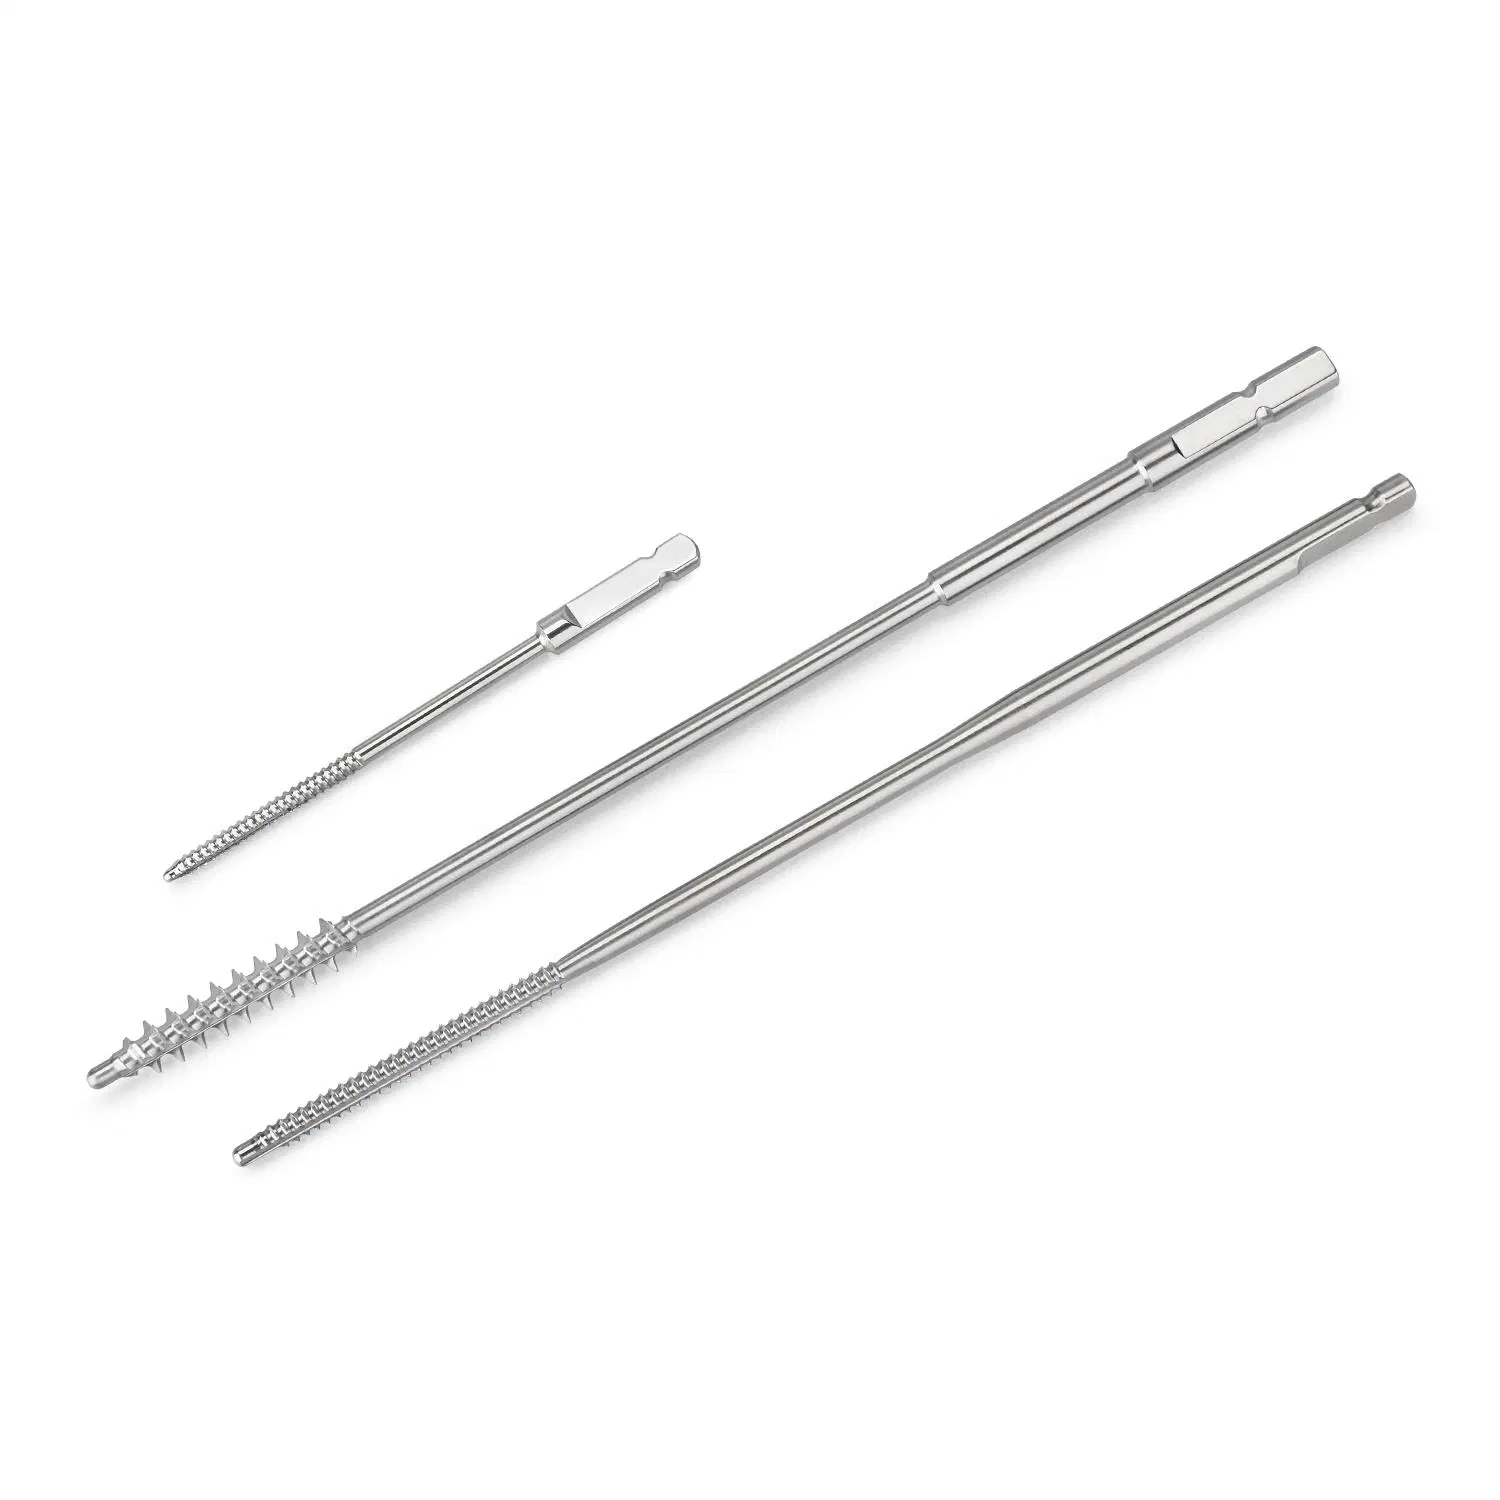 High Quality Medical Stainless Steel Flexible Ao Quick Coupling / Twist / Straight / Normal Drill Bits for Bone Surgery